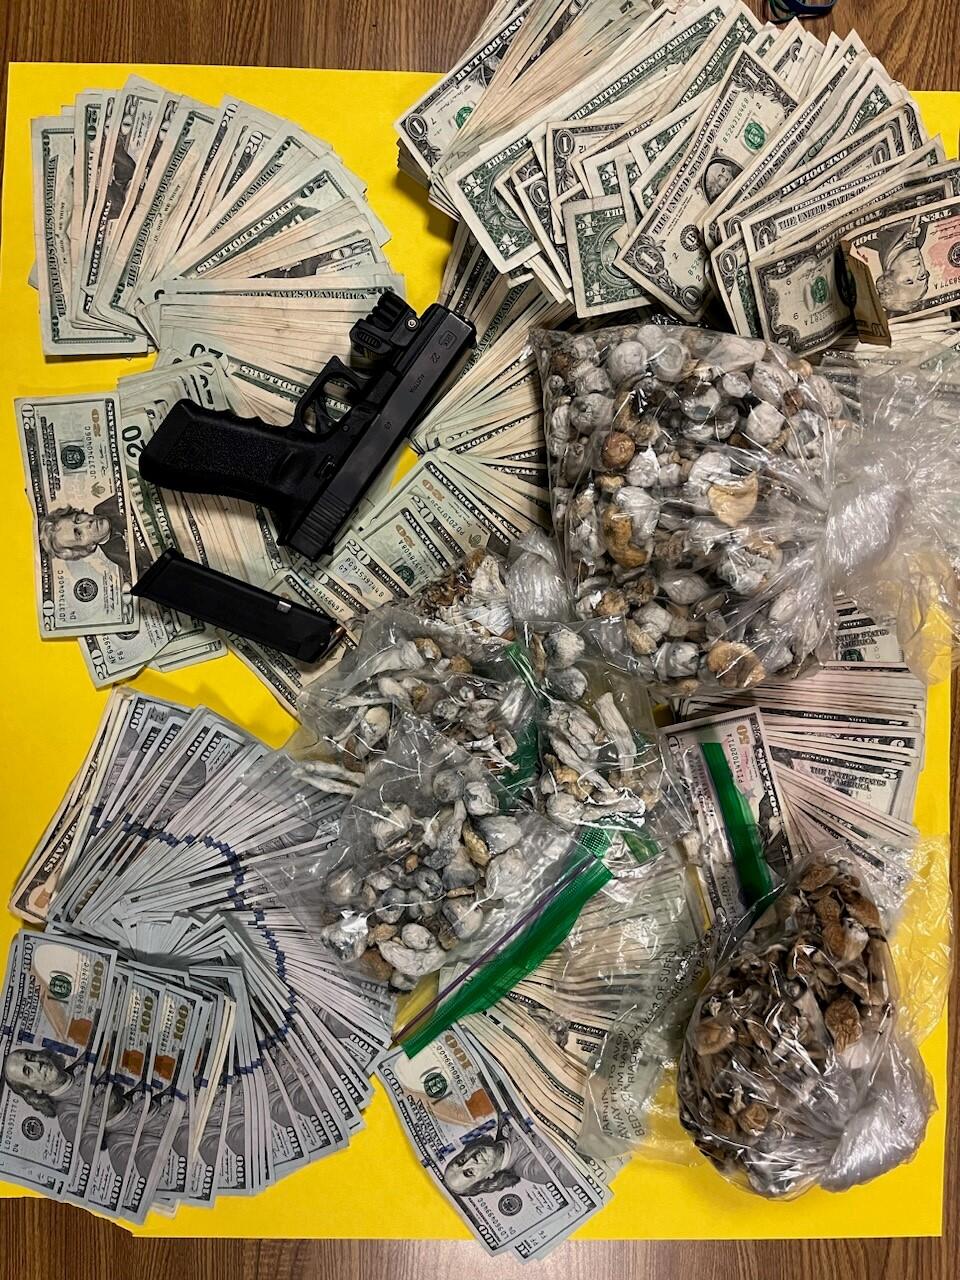 Santa Rosa Police Department detectives found about one pound of mushrooms, a loaded pistol, and $18,000 in a Rohnert Park man’s possession after serving a search warrant Monday, May 8, 2023. (Santa Rosa Police Department)